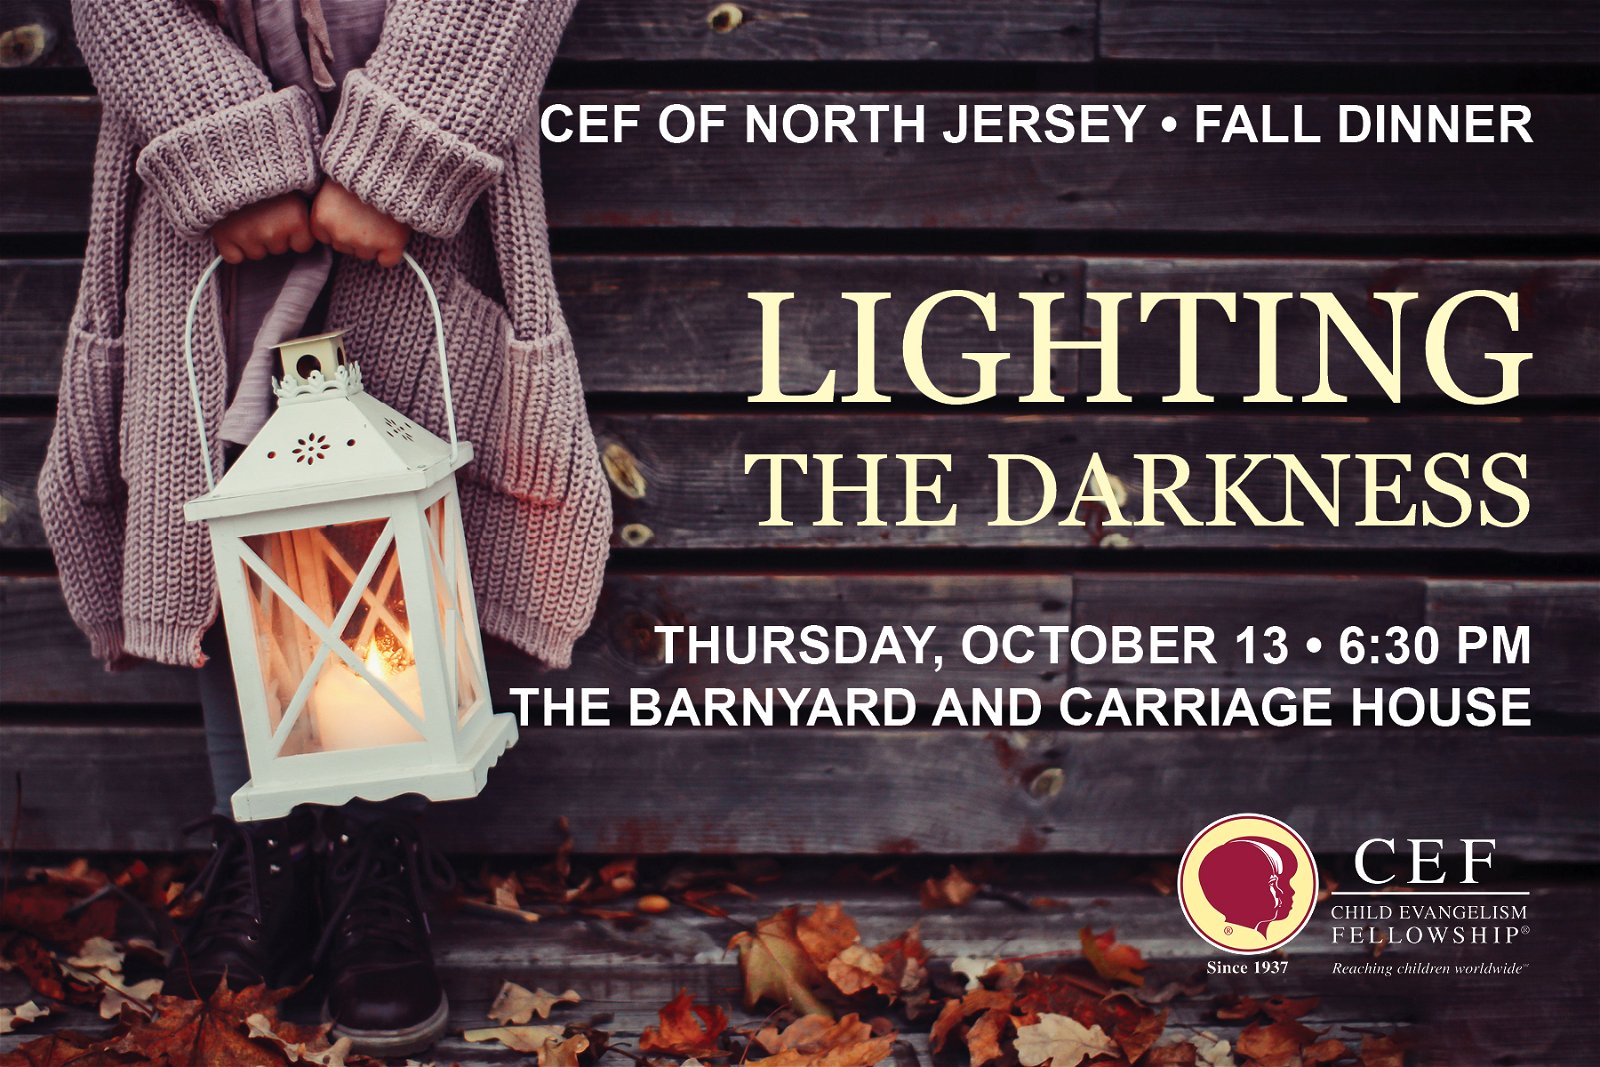 Image with young girl holding lantern overlaid with text Lighting the Darkness and details for the CEF of North Jersey fall dinner October 13, 6:30 PM, The Barnyard and Carriage House